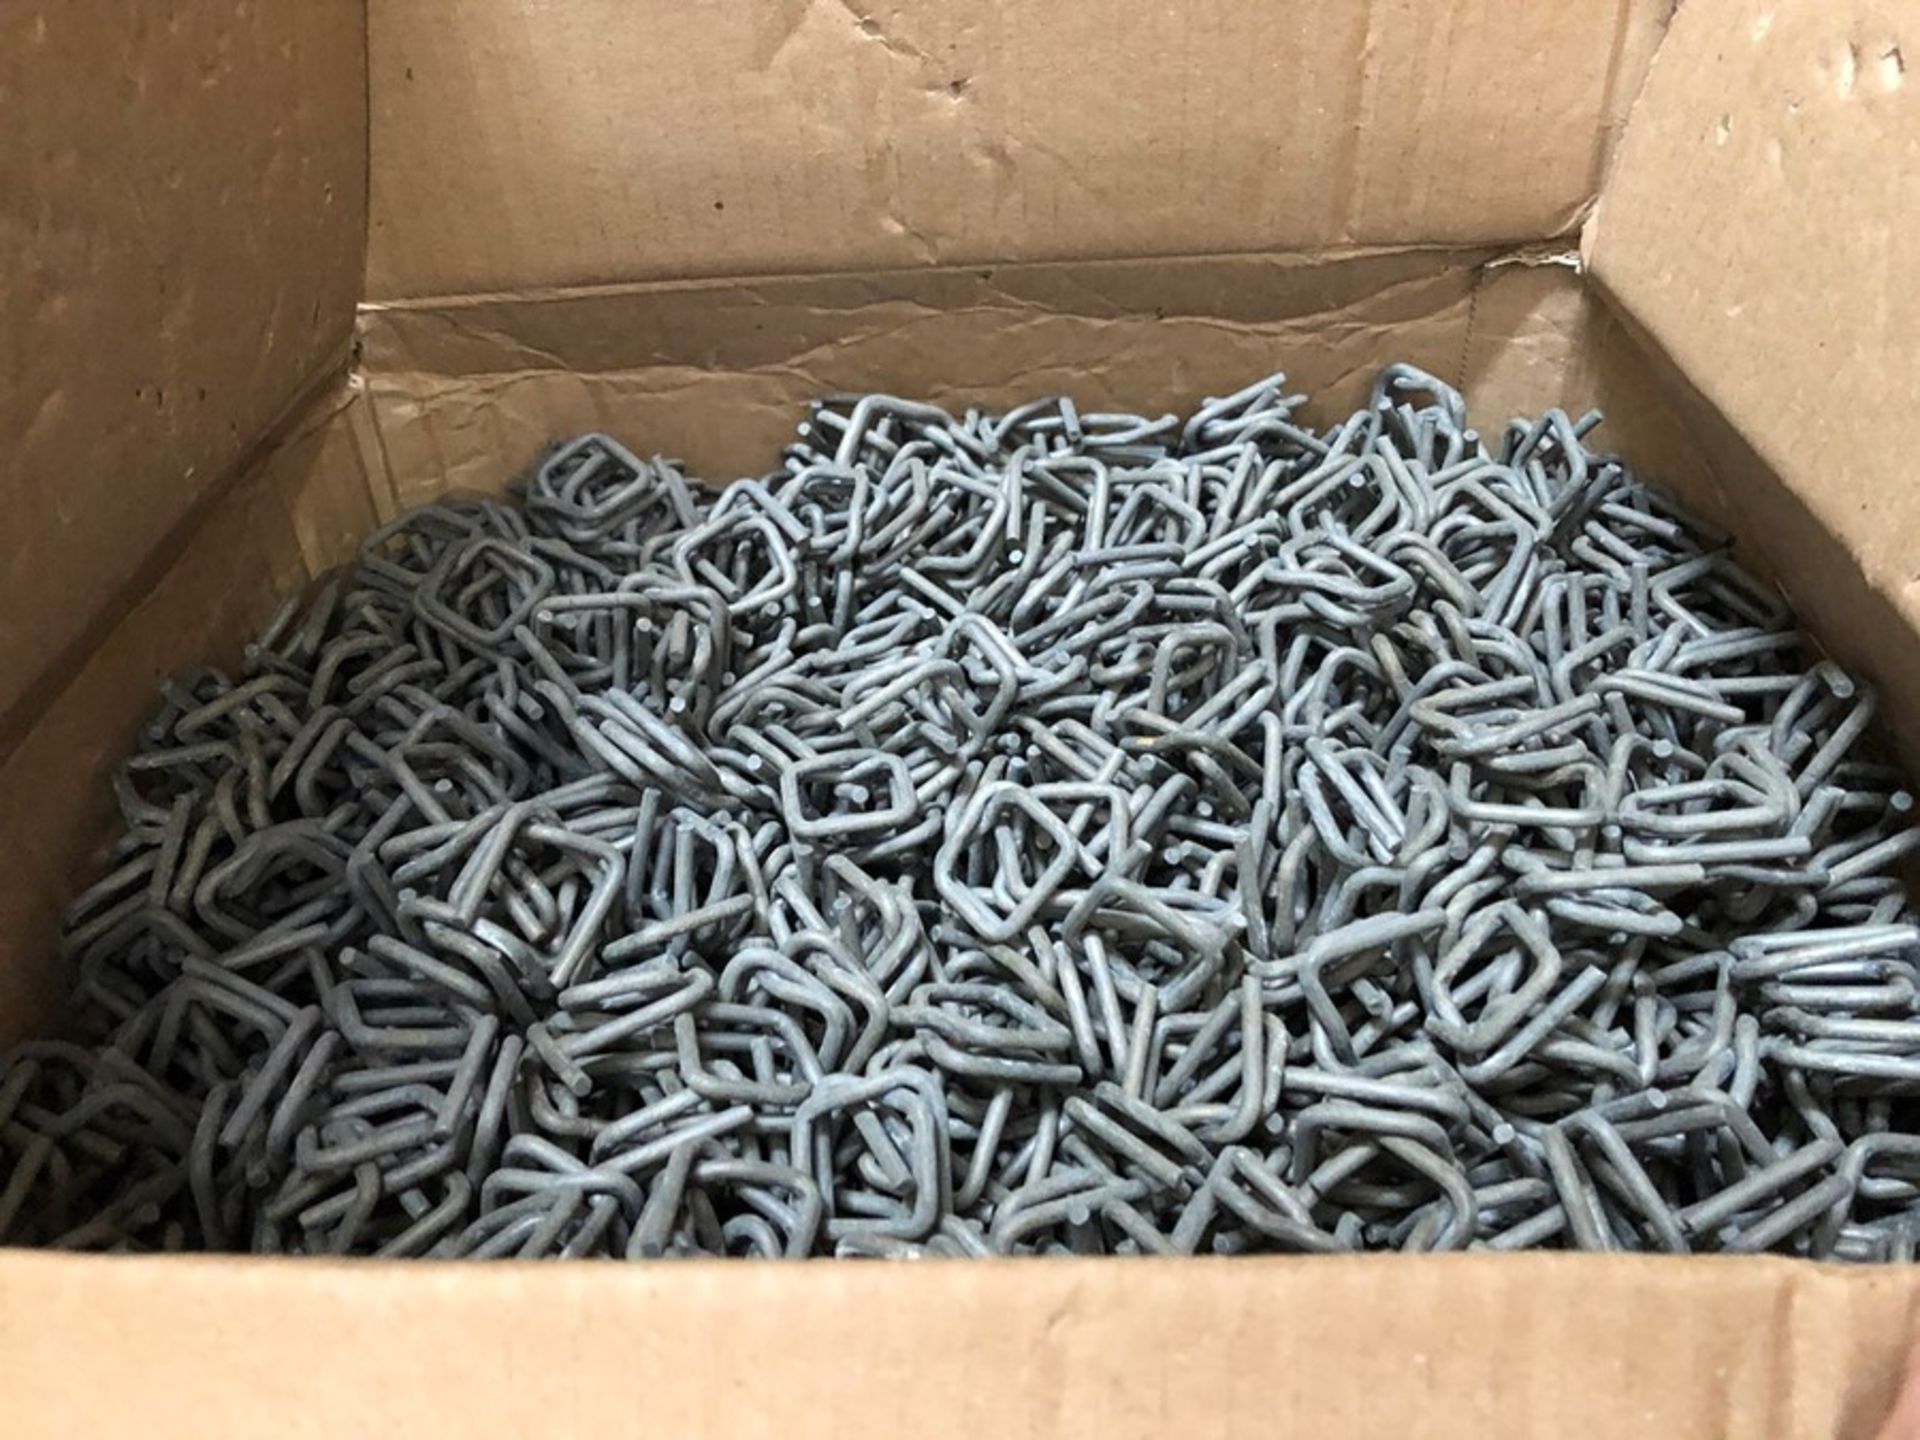 1 LOT TO CONTAIN 2 BOXED SETS CONTAINING 12MM PHOSPHATED BUCKLES - 1000 PER BOX (SOLD AS SEEN)